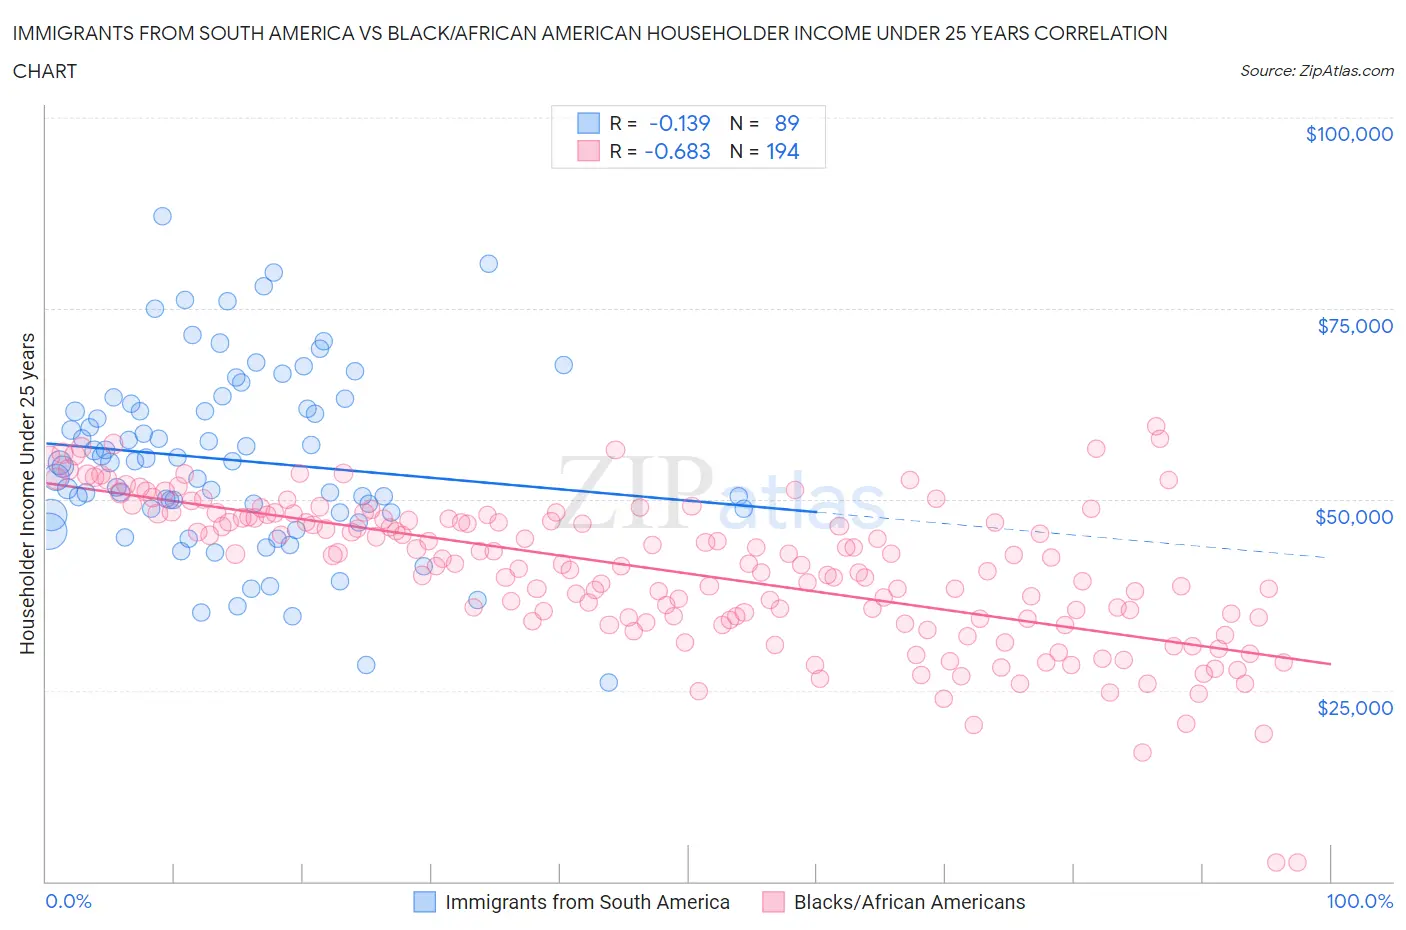 Immigrants from South America vs Black/African American Householder Income Under 25 years